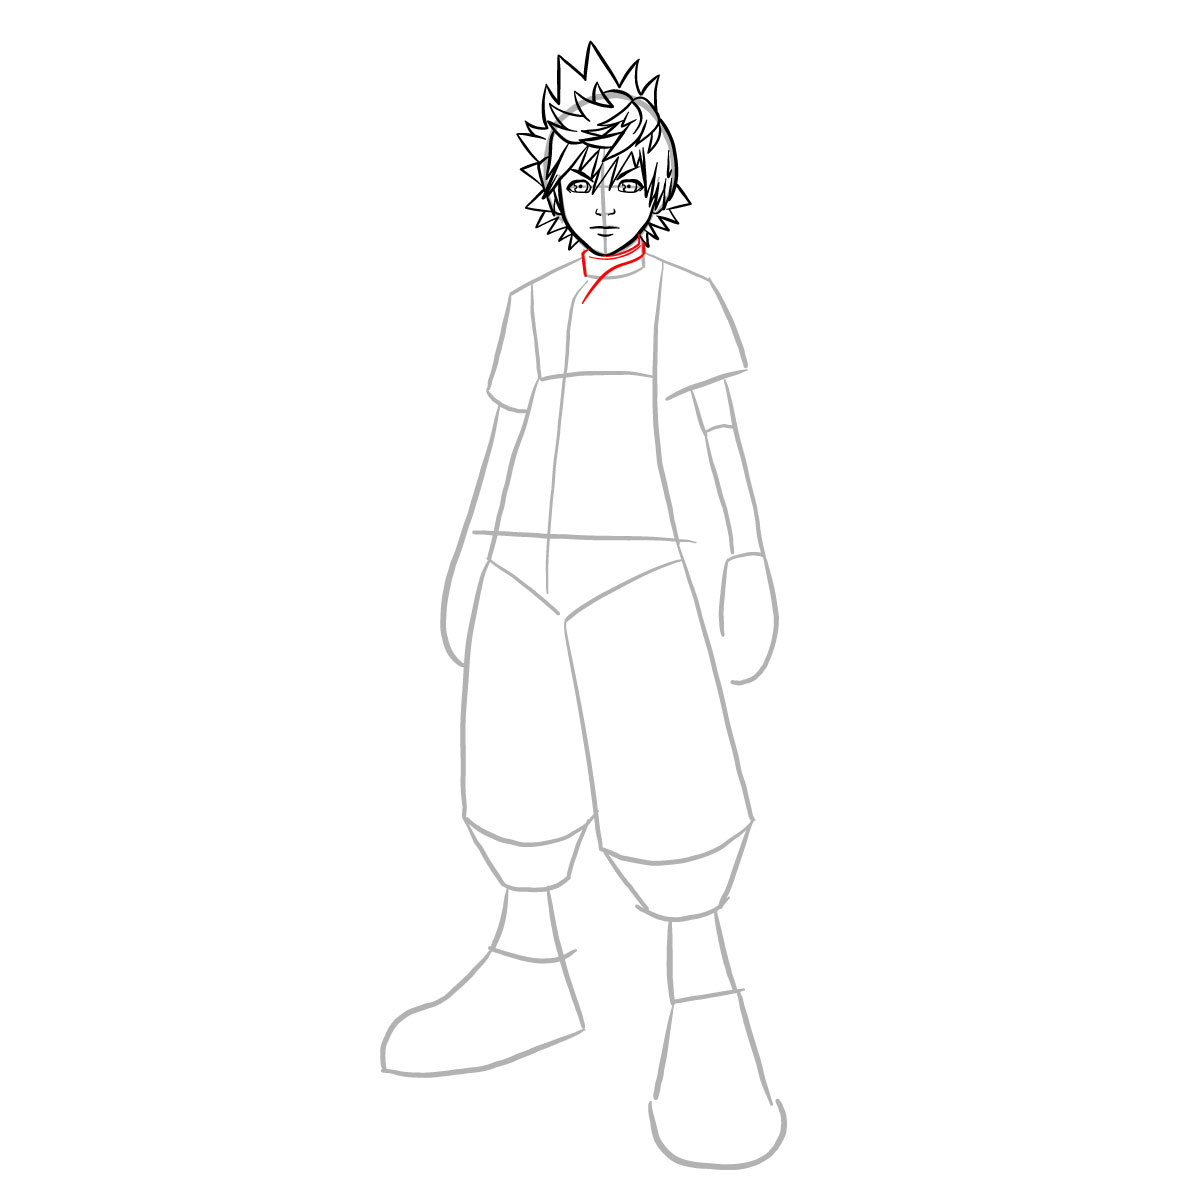 How to draw Ventus - step 17